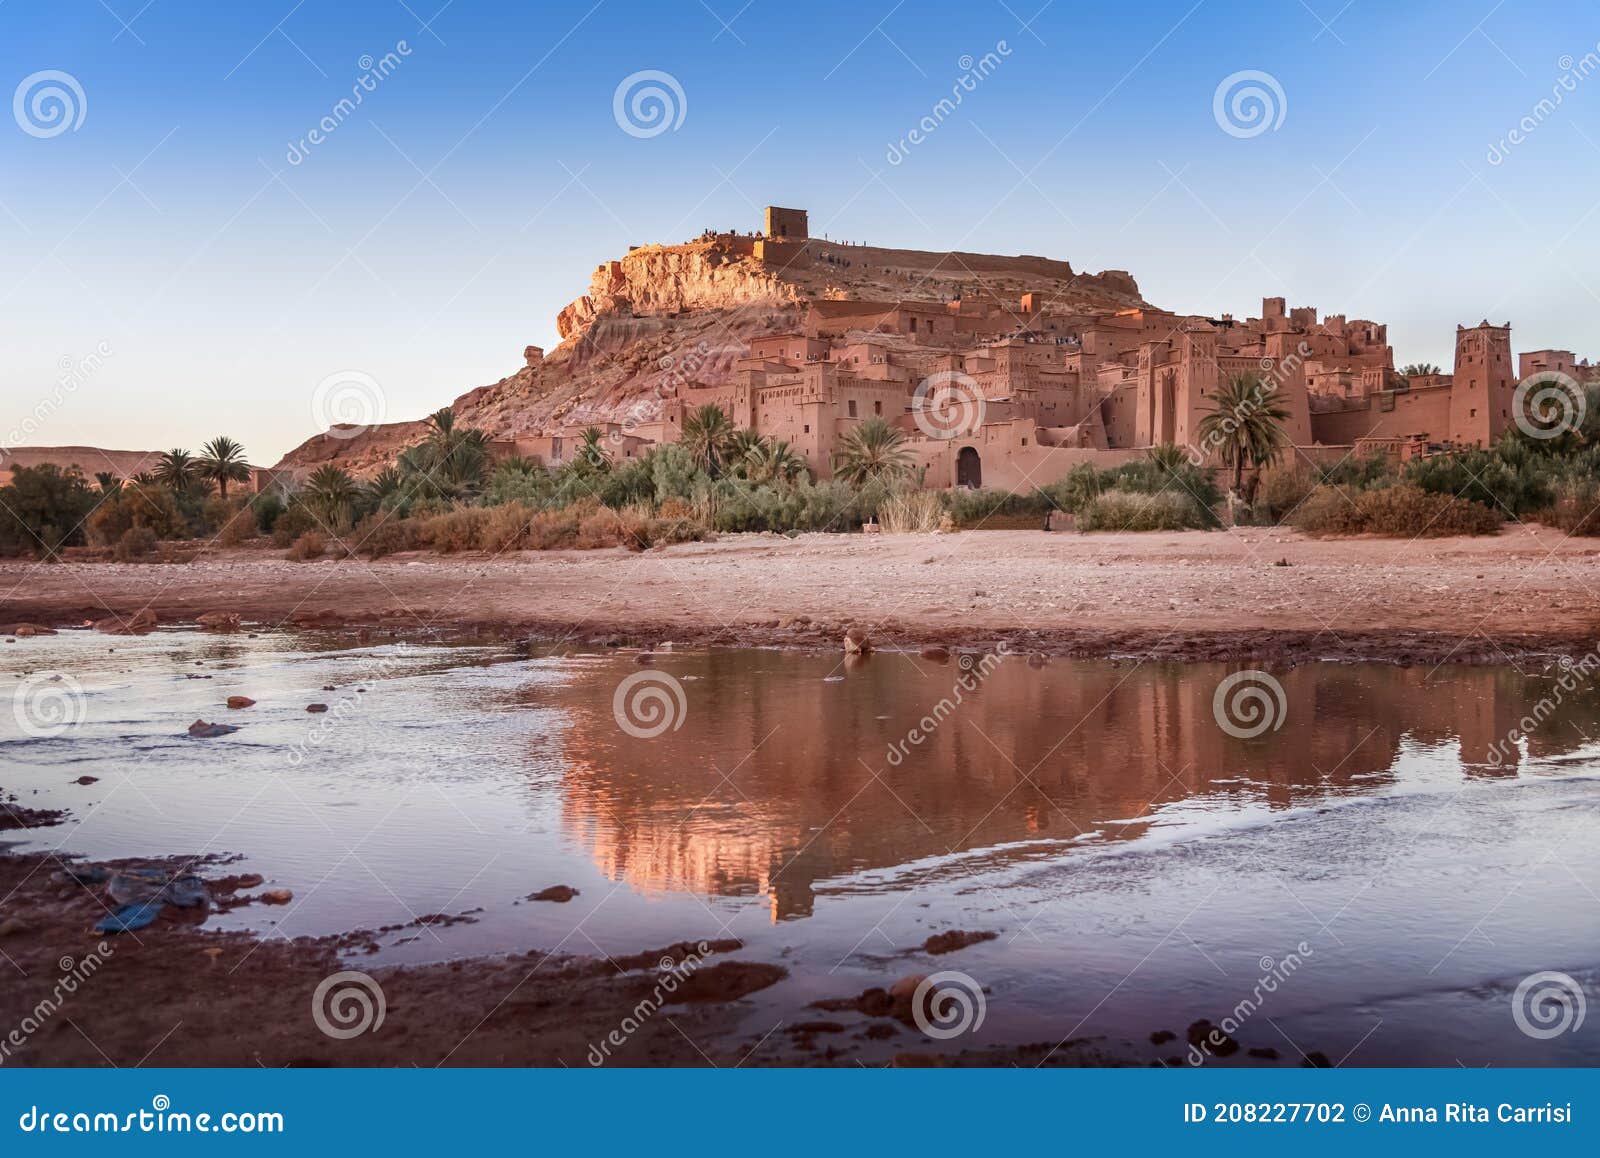 ait-ben-haddou is one of the 9 sites in morocco that unesco has declared a world heritage site.